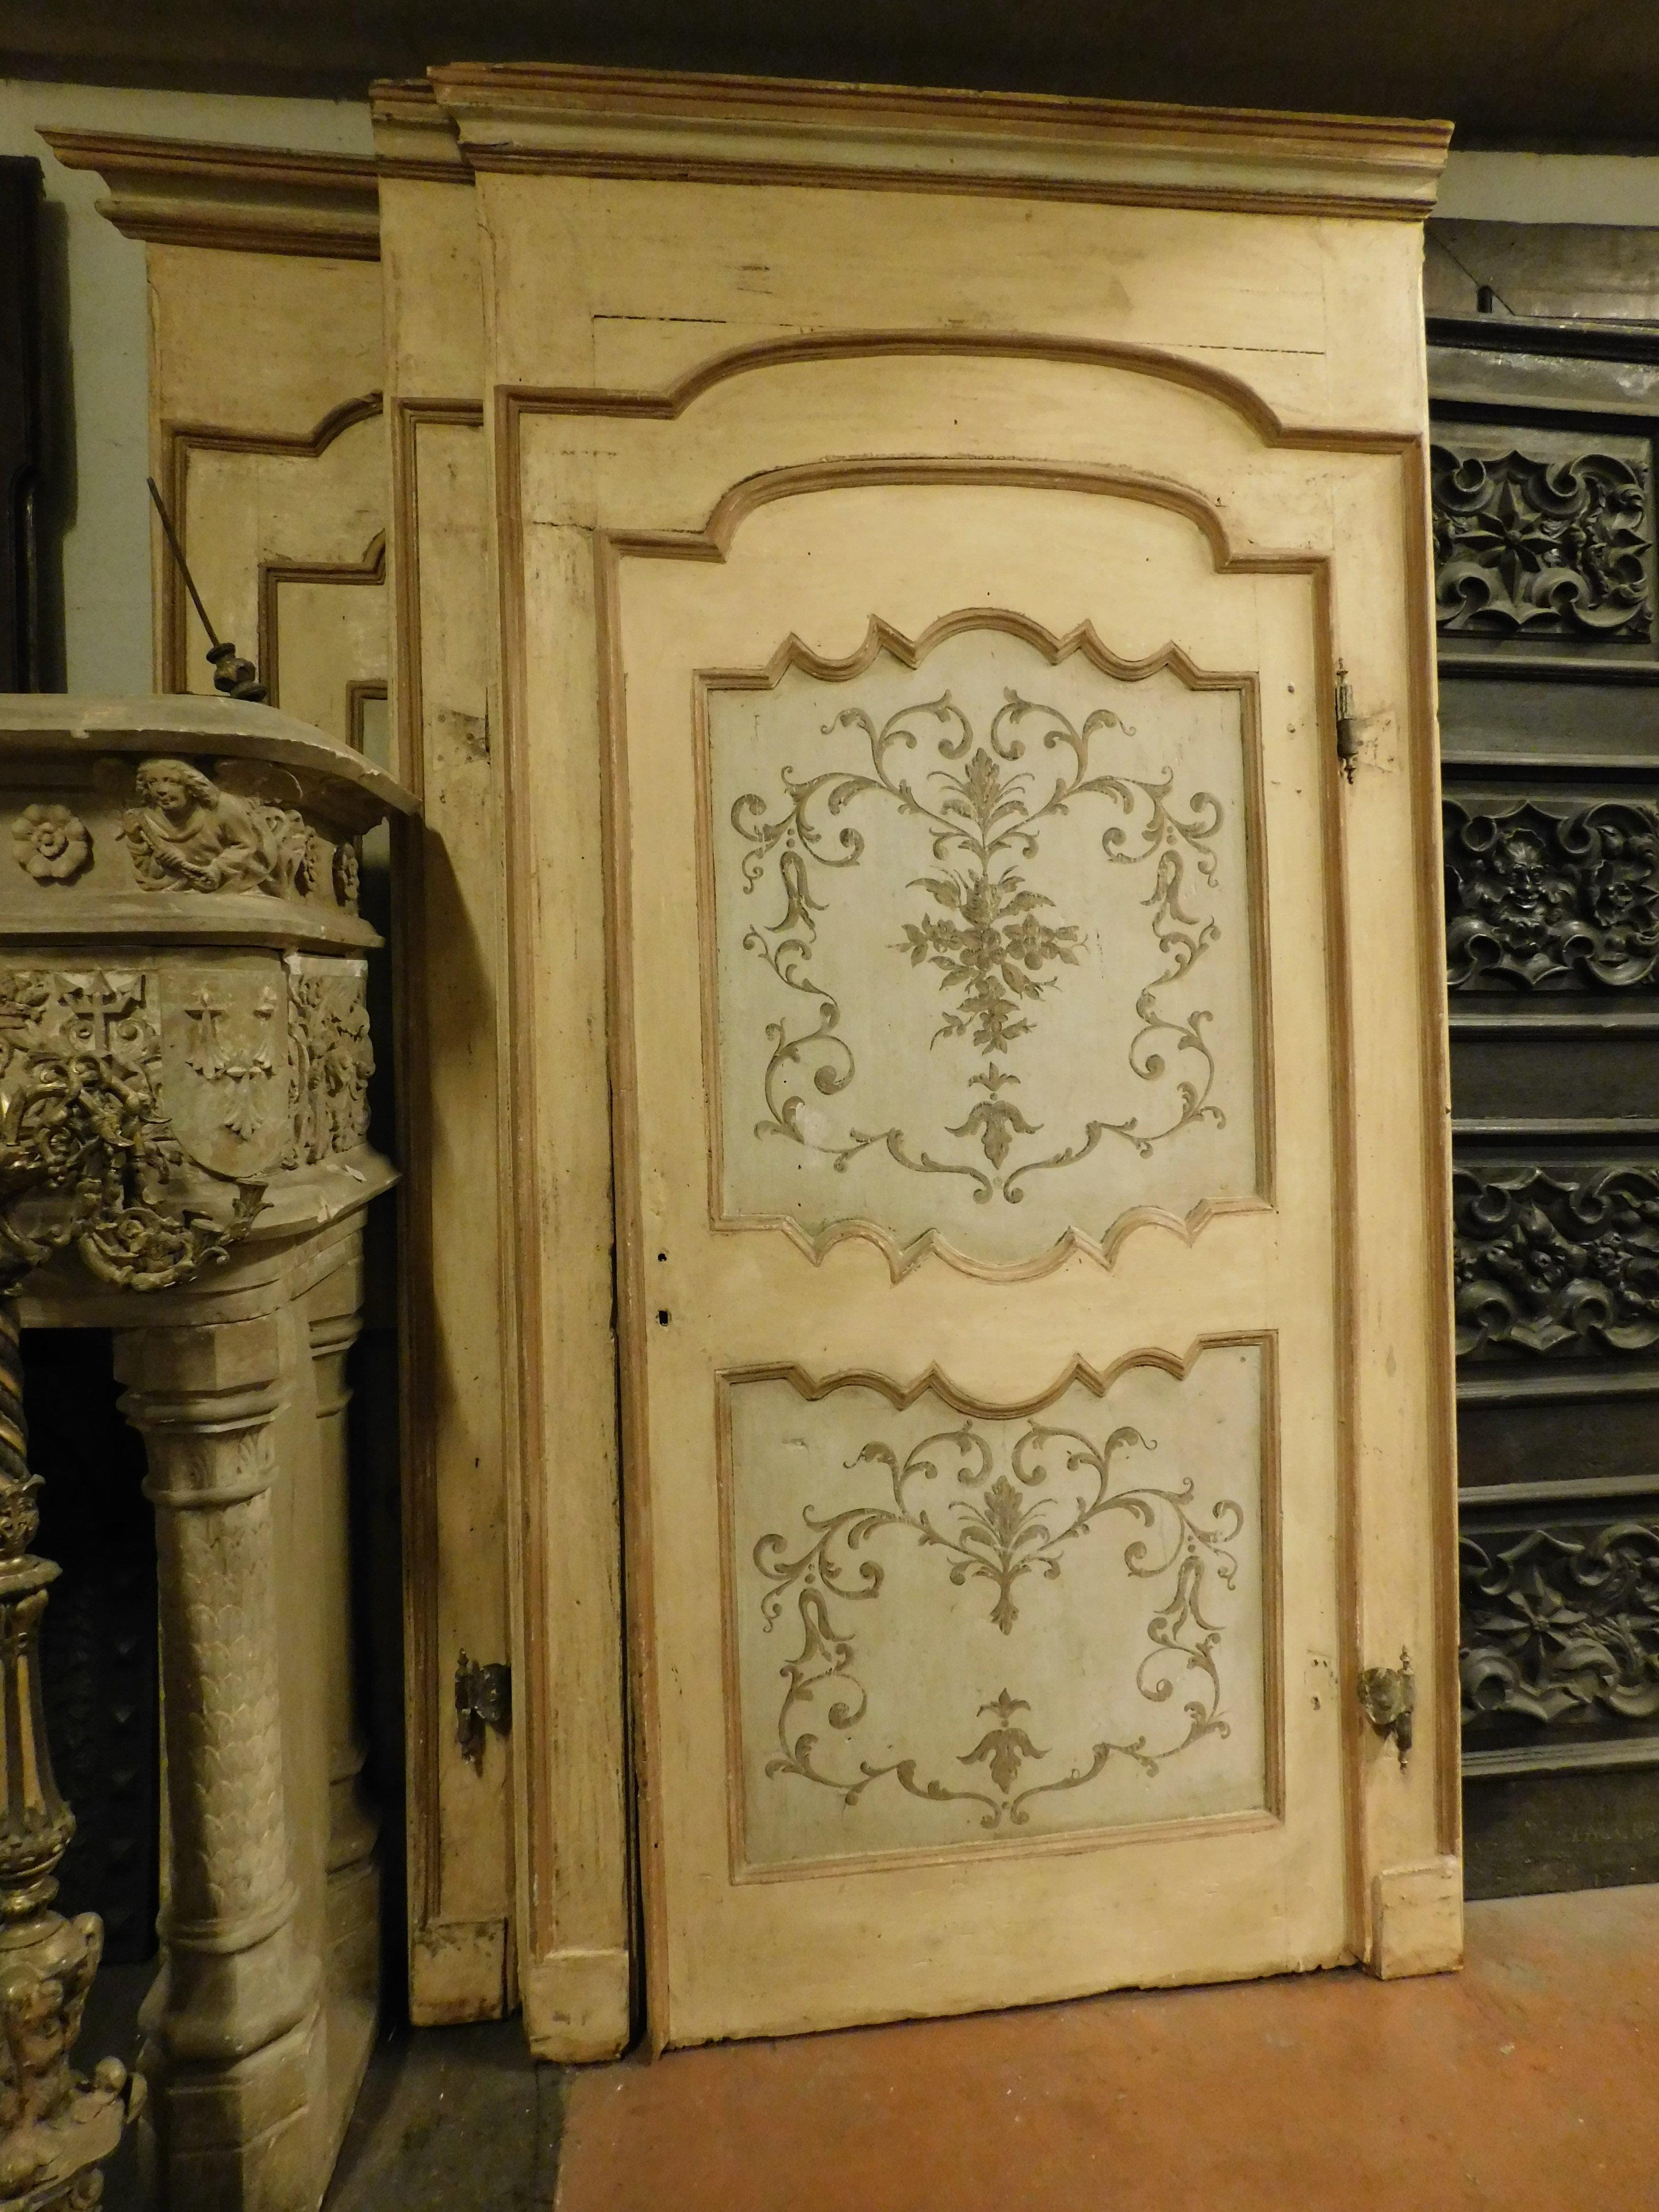 set of N.3 antique interior doors, carved in the panel, built in solid wood and hand painted with floral decorations, complete with original frame and irons, they have a gooseneck opening (bias opening), original from the first half of the 18th